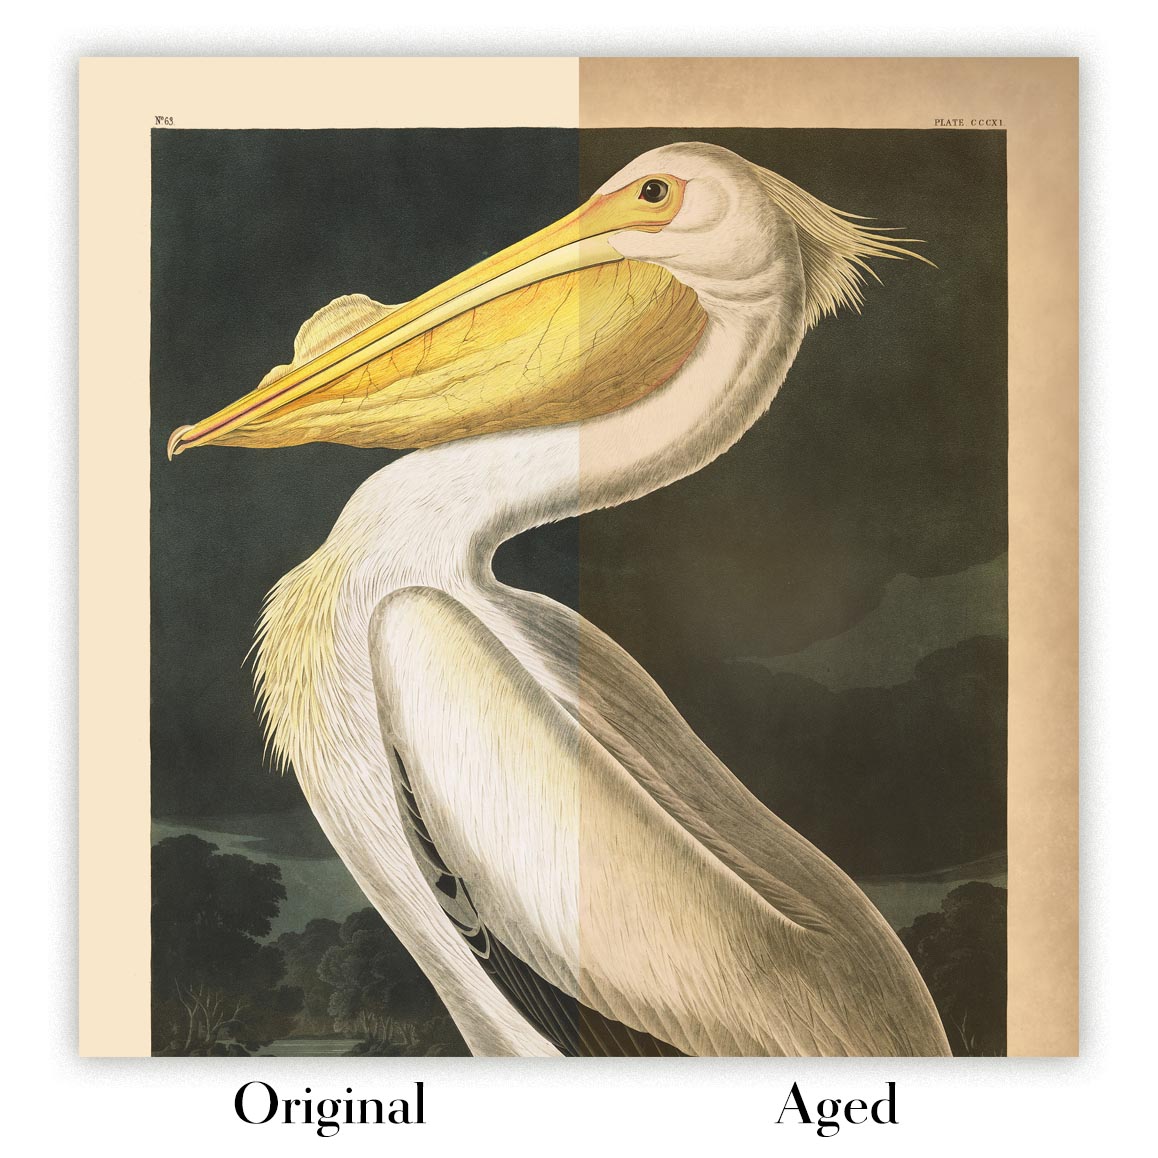 Image showing the difference between an Original art print and an Aged art print